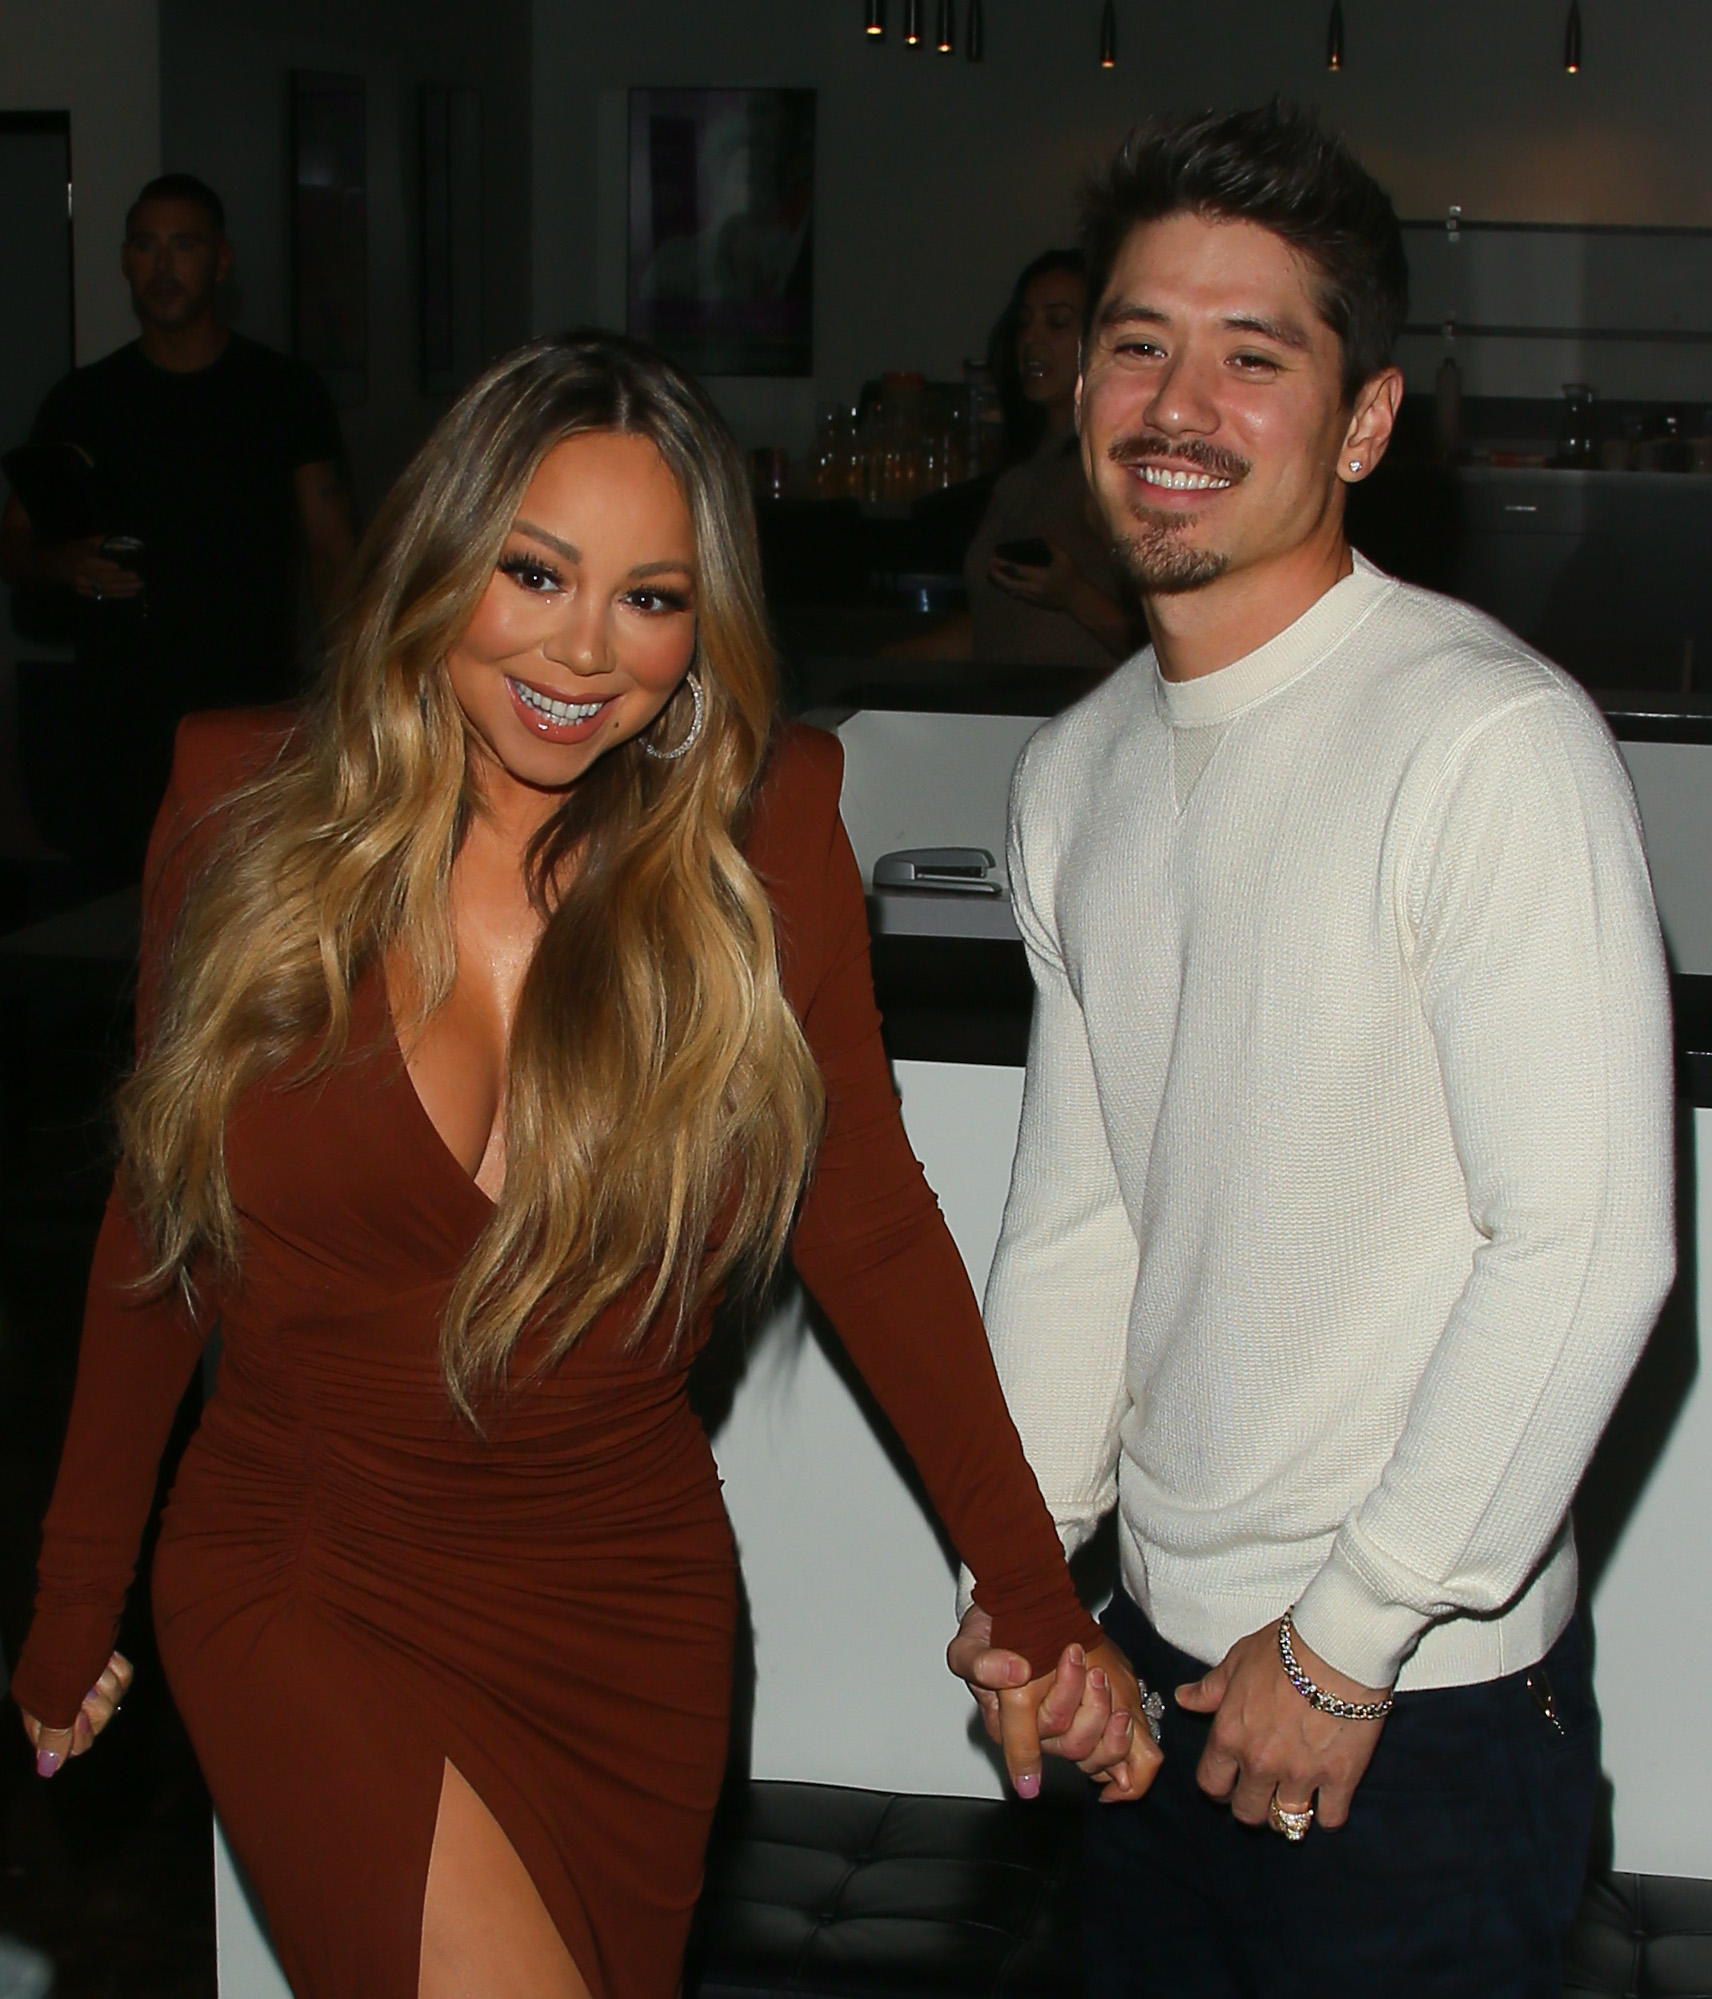 Mariah and Bryan smiling and holding hands